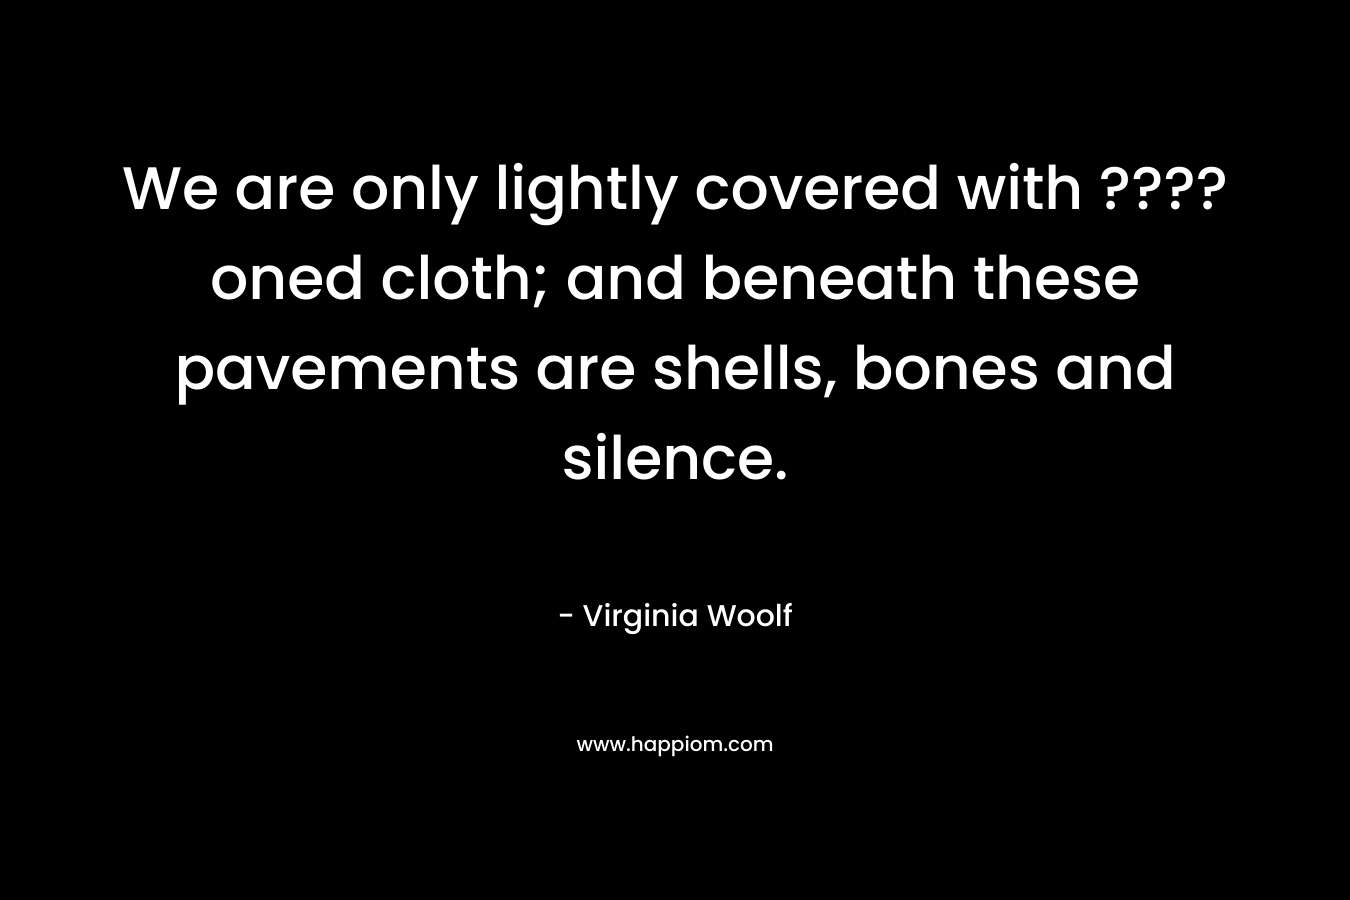 We are only lightly covered with ????oned cloth; and beneath these pavements are shells, bones and silence. – Virginia Woolf